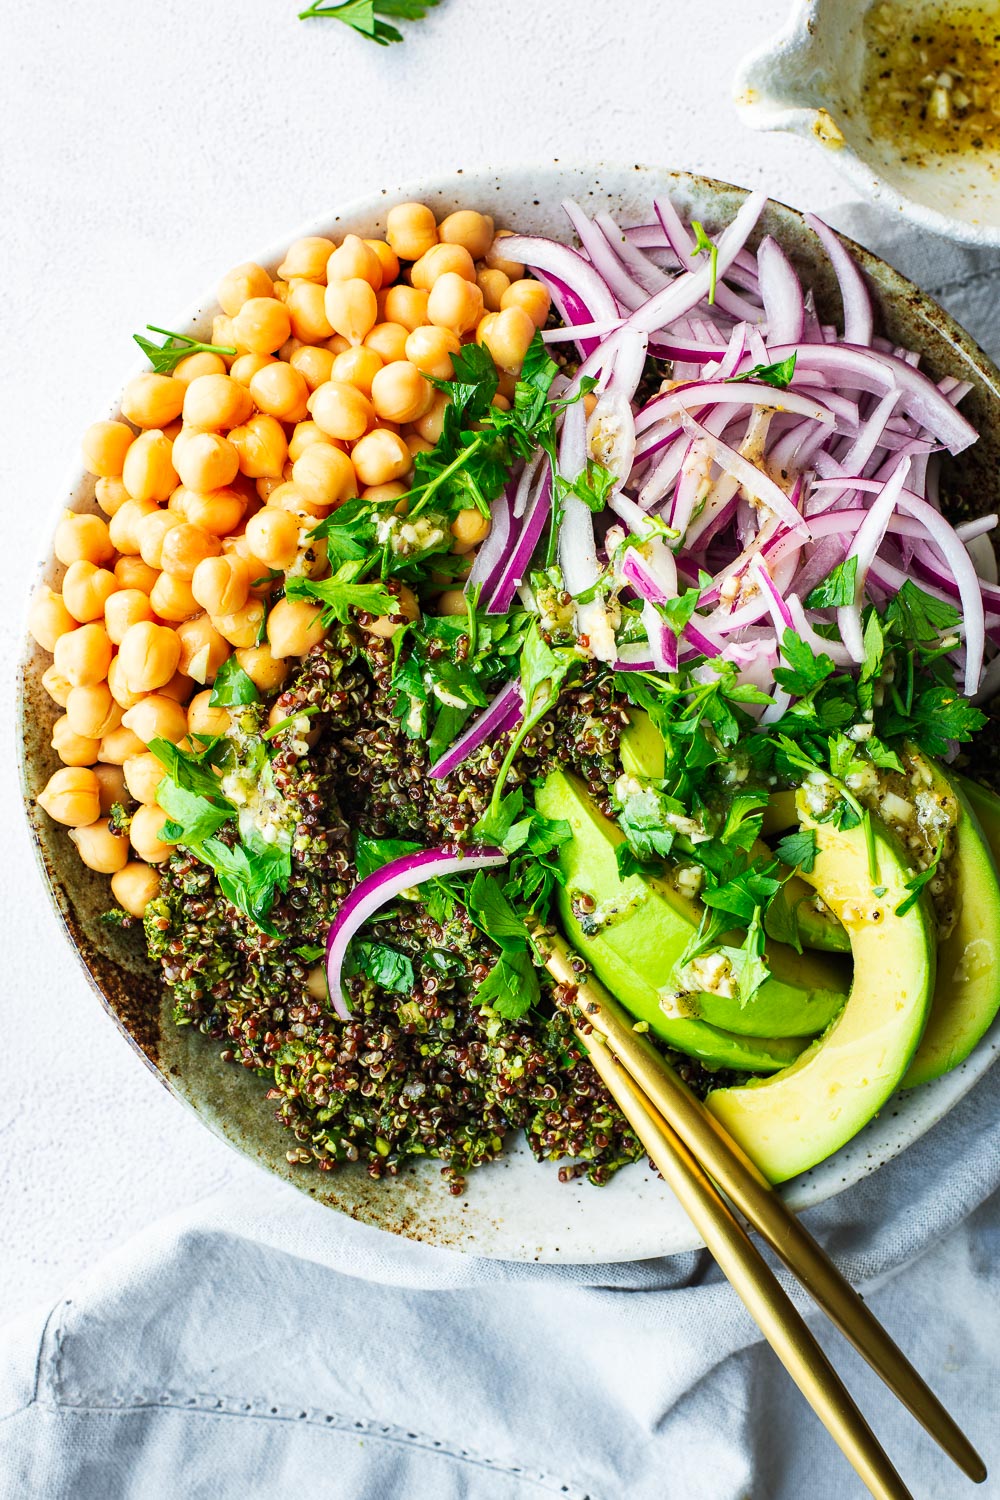 A kale and quinoa salad with chickpeas, avocado, red onion, and preserved lemon dressing in a ceramic bowl with gold cutlery.